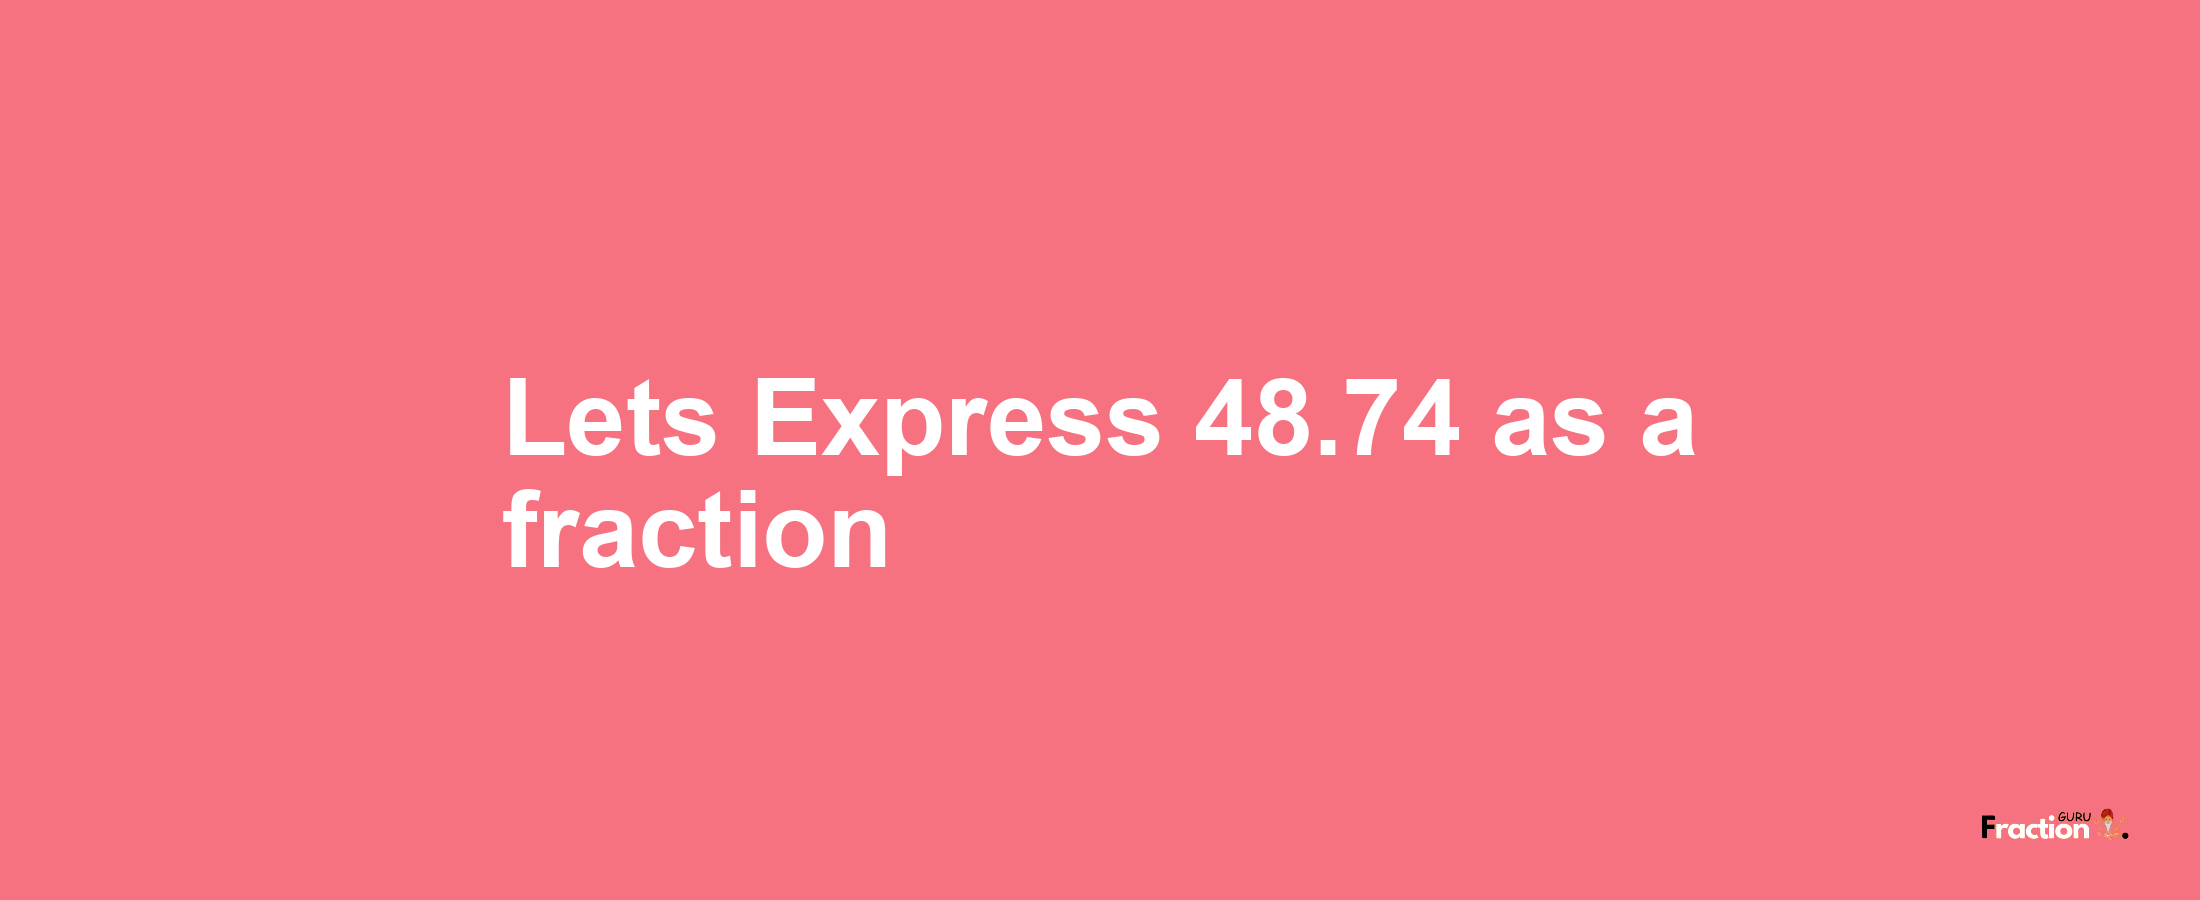 Lets Express 48.74 as afraction